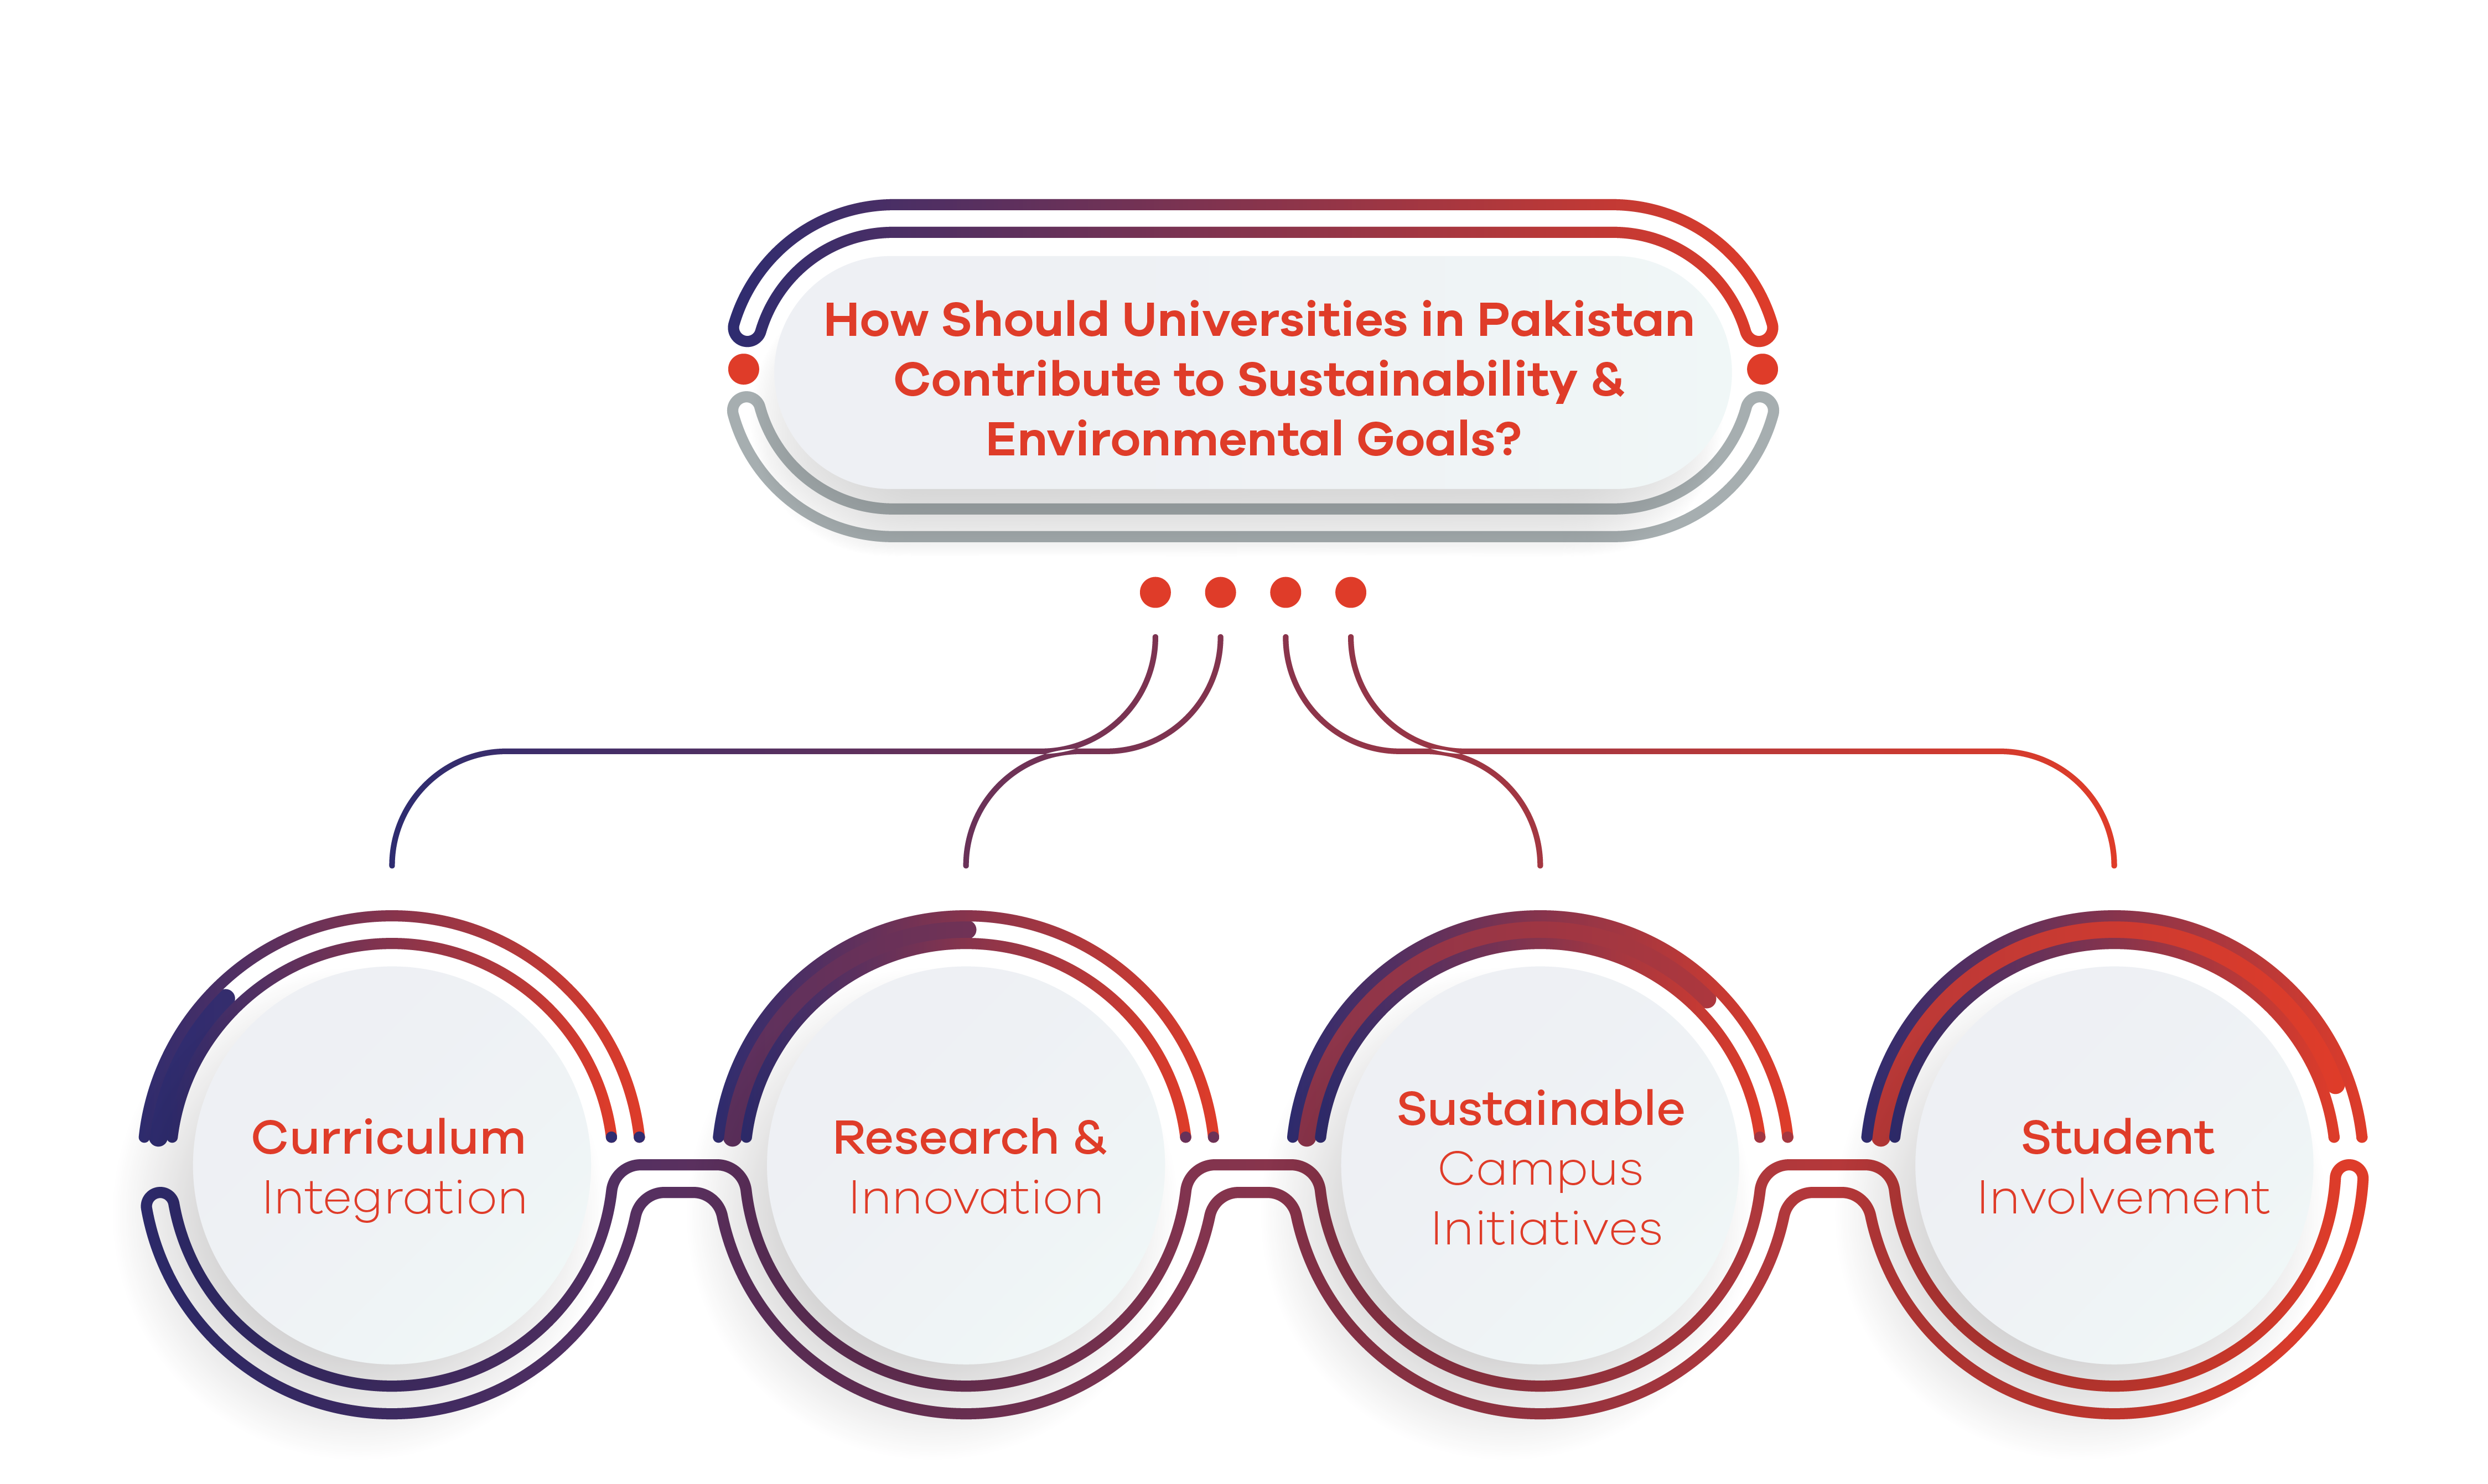 How Should Universities in Pakistan Contribute to Sustainability and Environmental Goals?